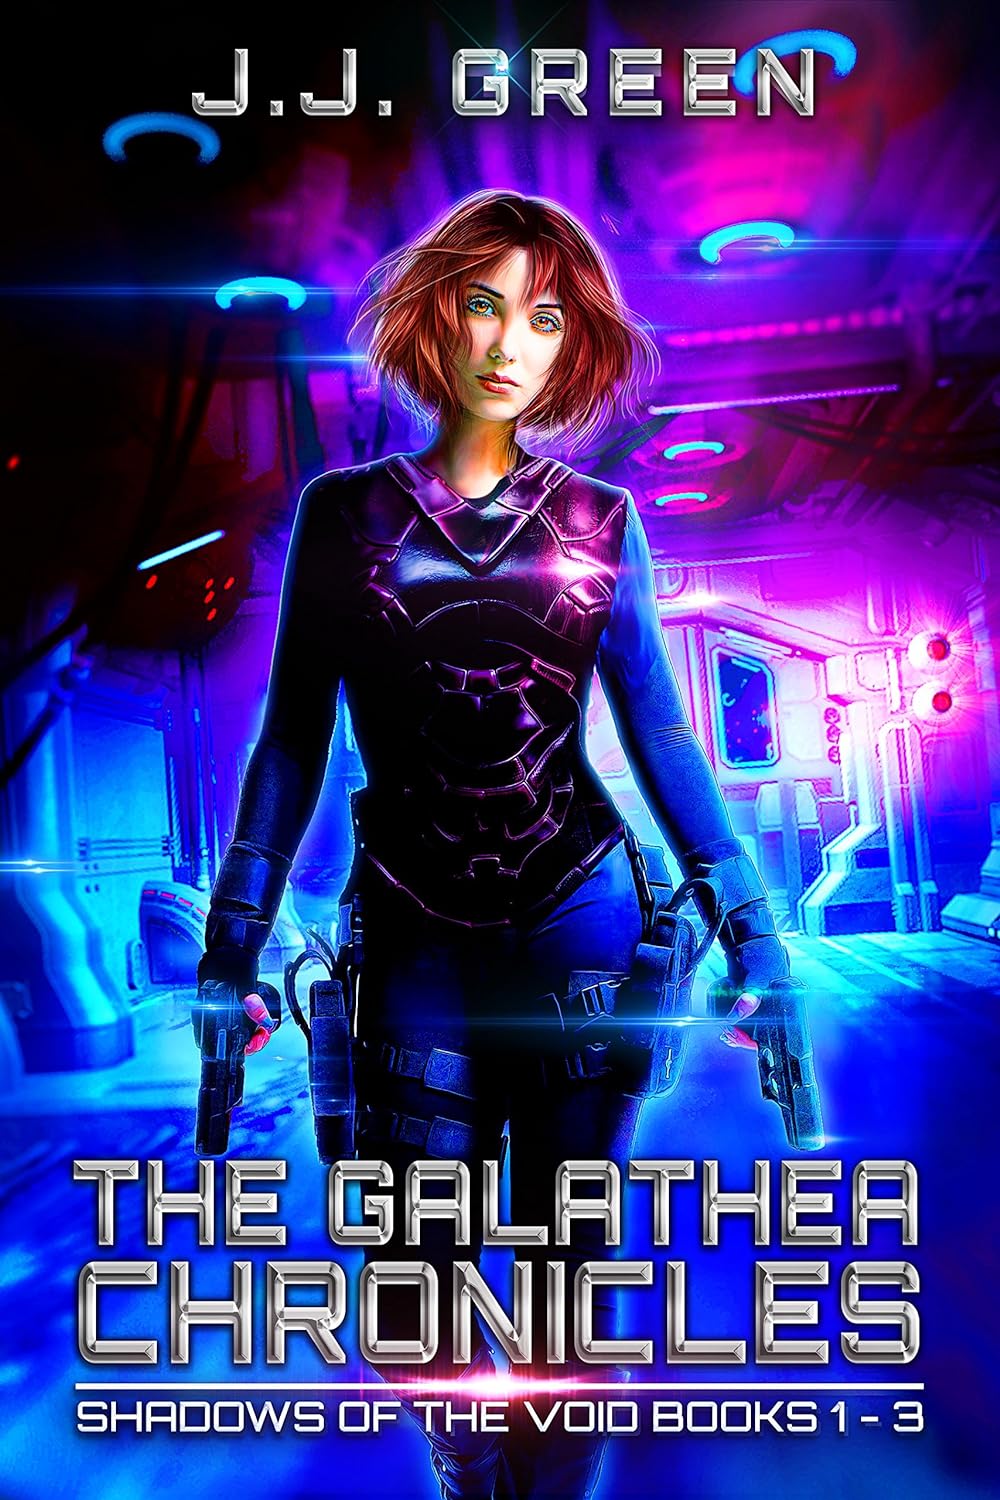 The Galathea Chronicles: Shadows of the Void Books 1-3 are free on Amazon Kindle